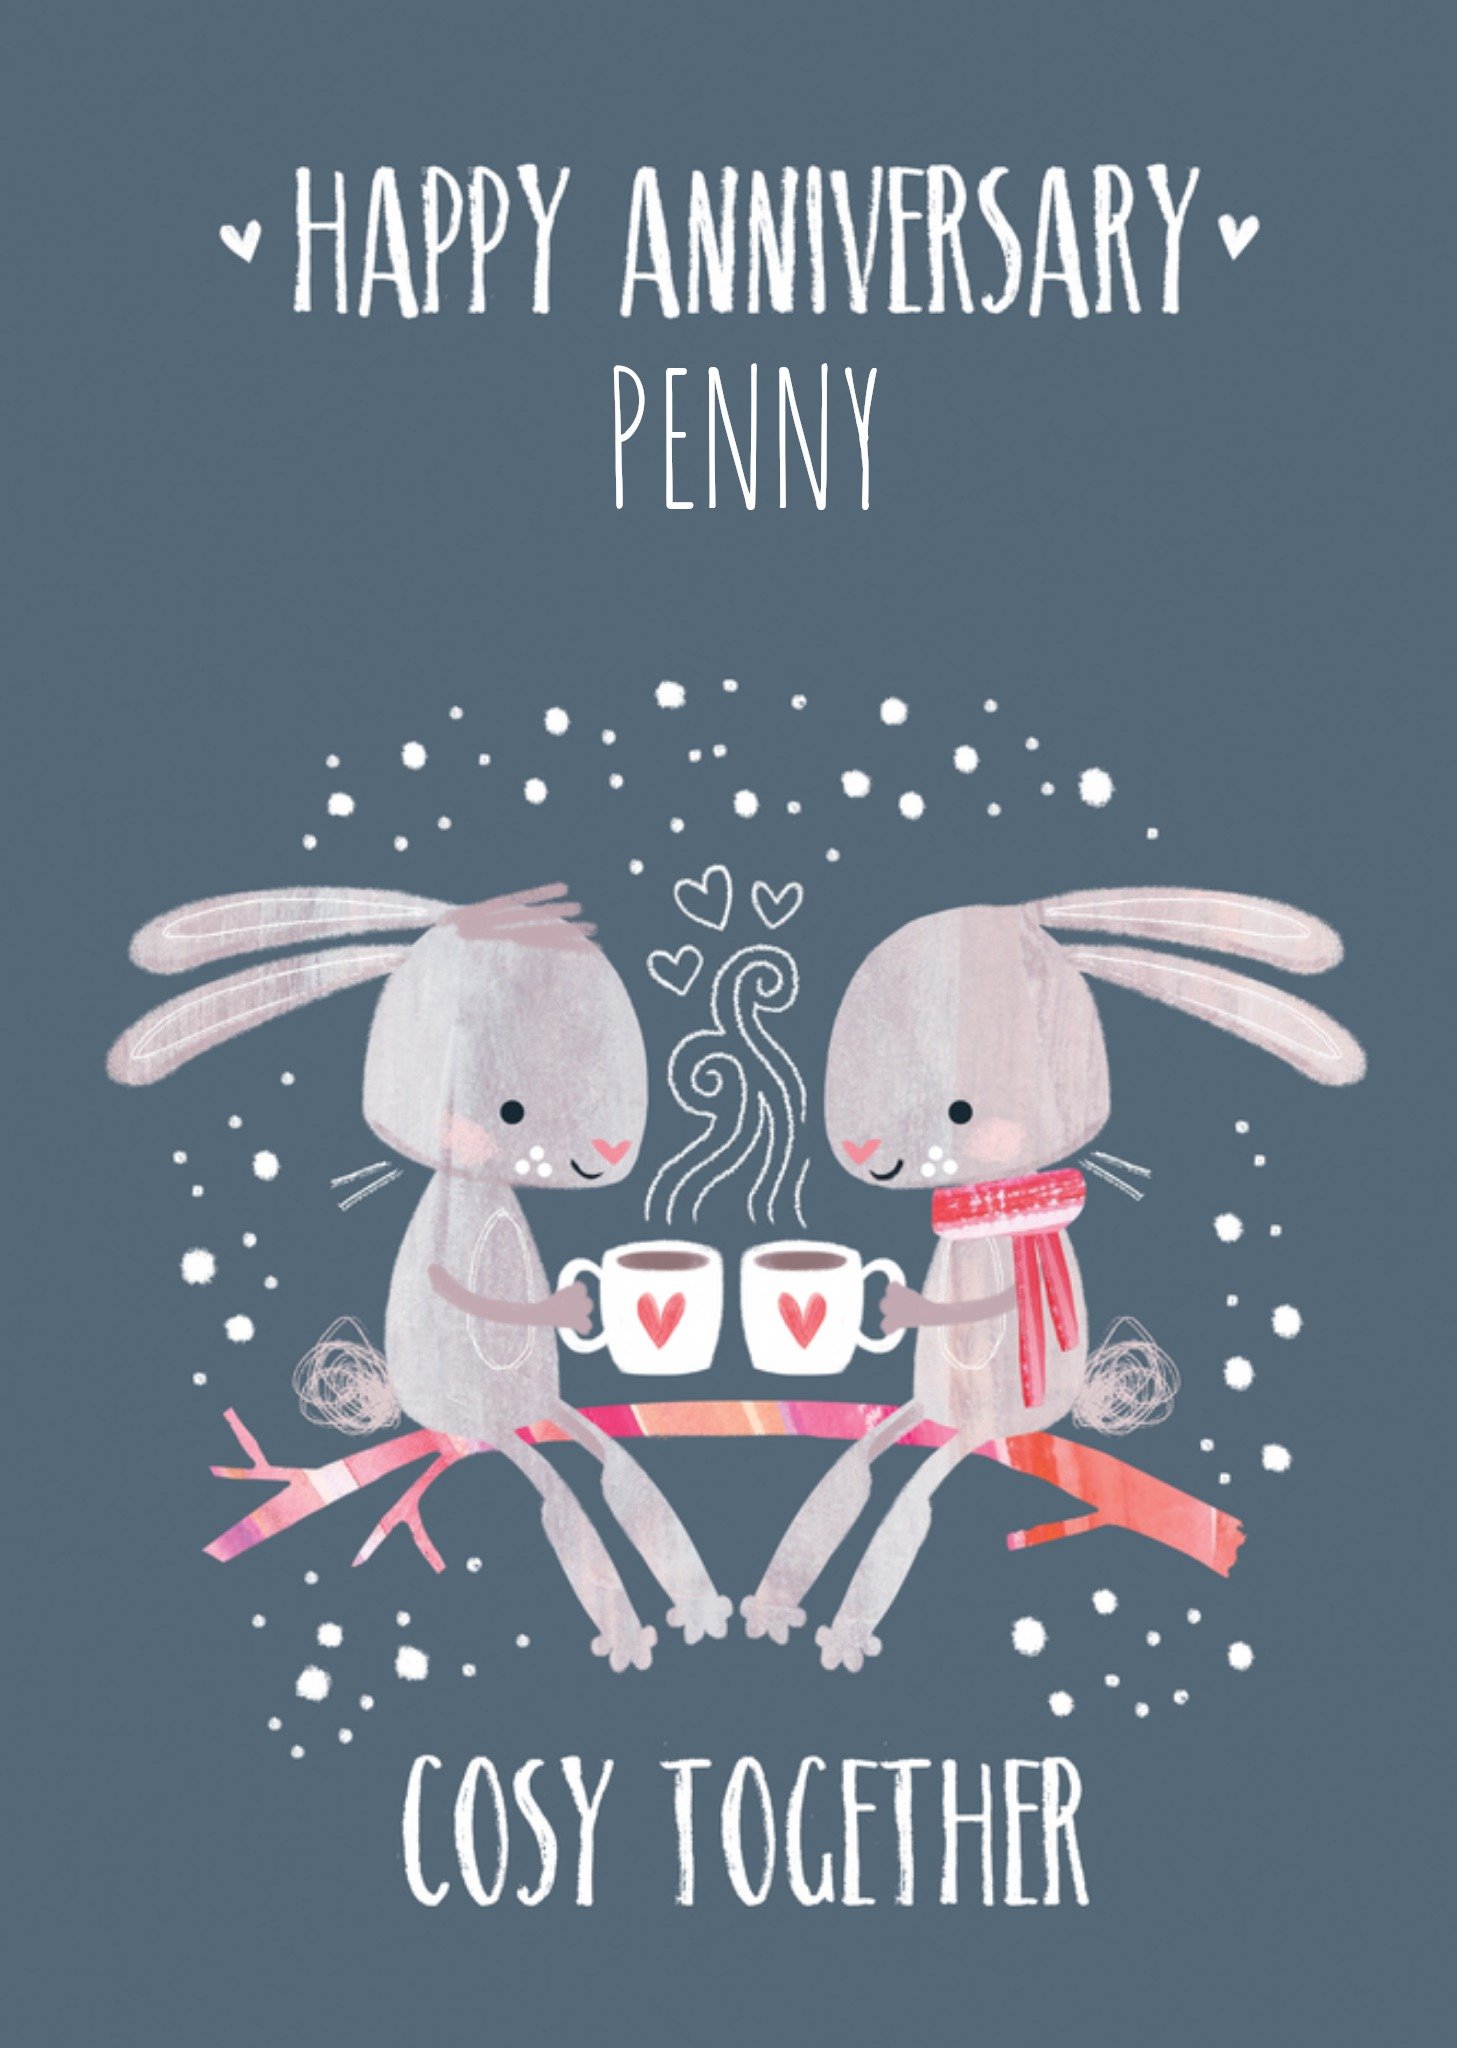 Moonpig Sweet Illustrated Cosy Together Bunnies Drink Hot Chocolate Anniversary Card Ecard